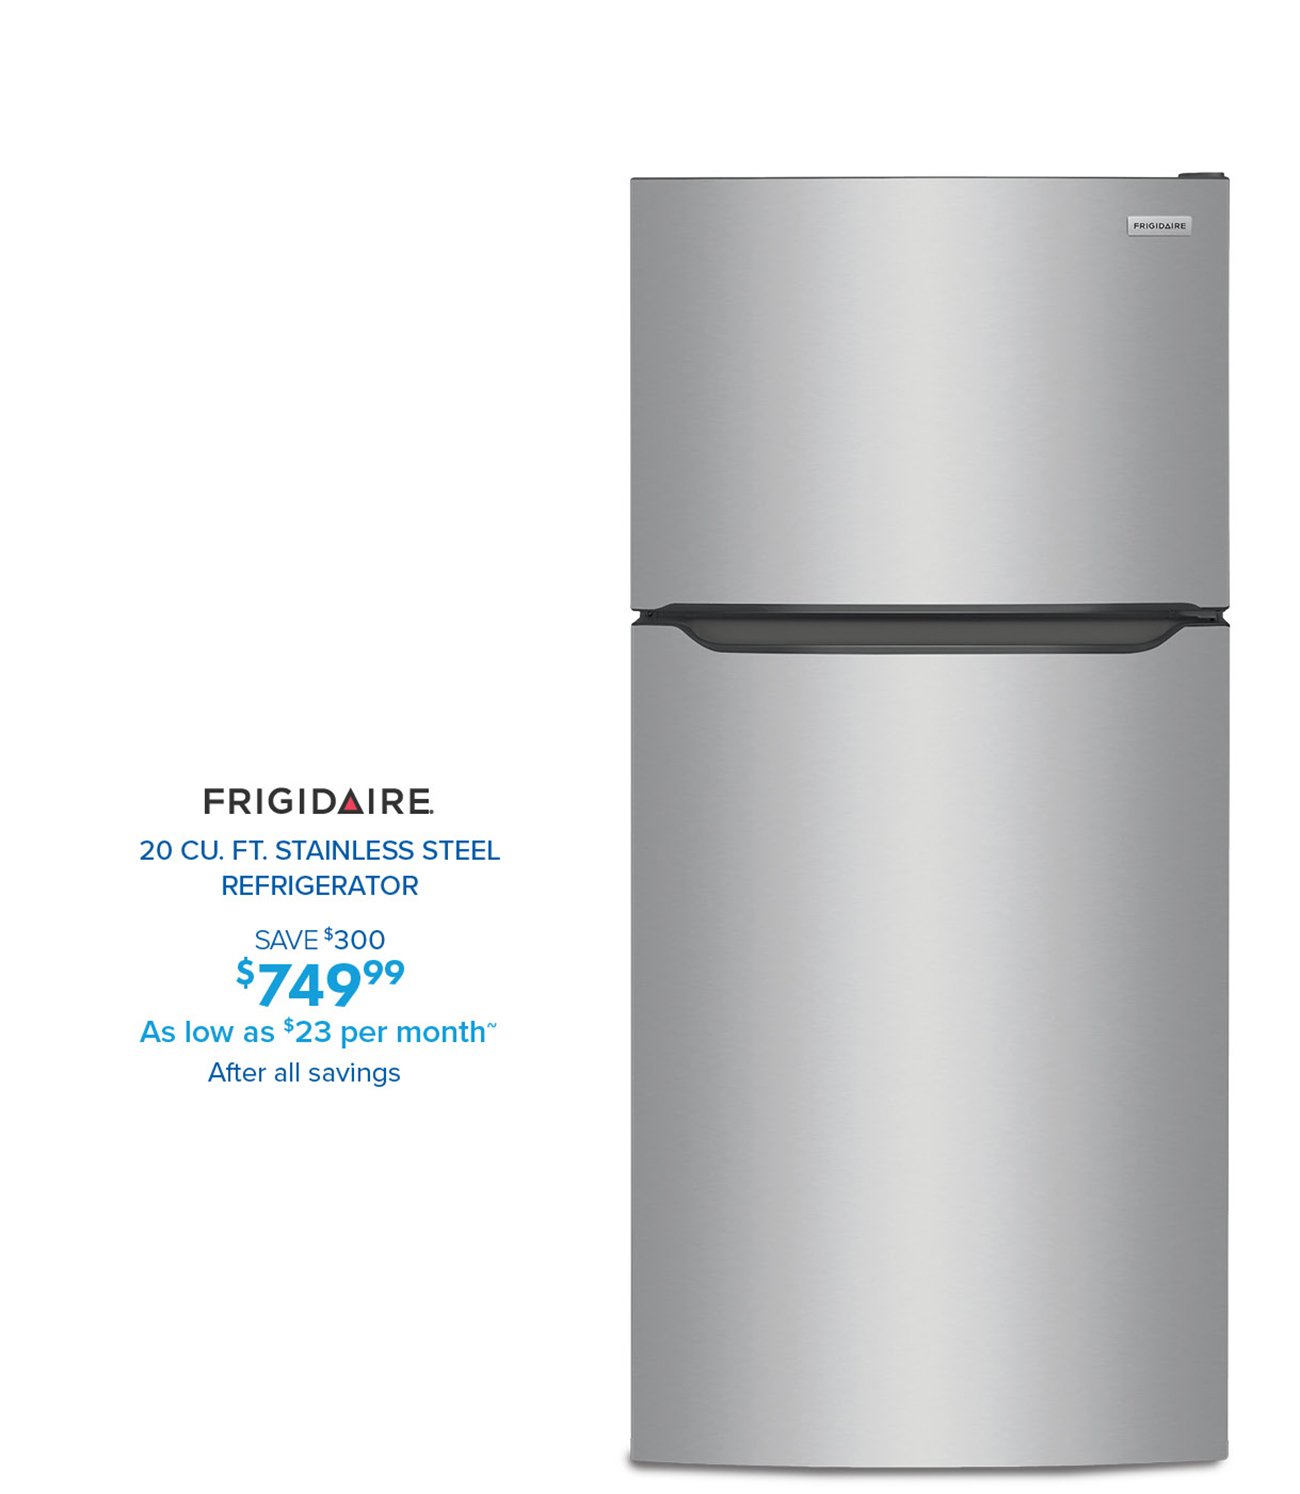 FRIGIDAIRE 20 CU. FT. STAINLESS STEEL REFRIGERATOR SAVE $300 S7A09%99 749 As low as $23 per month After all savings 